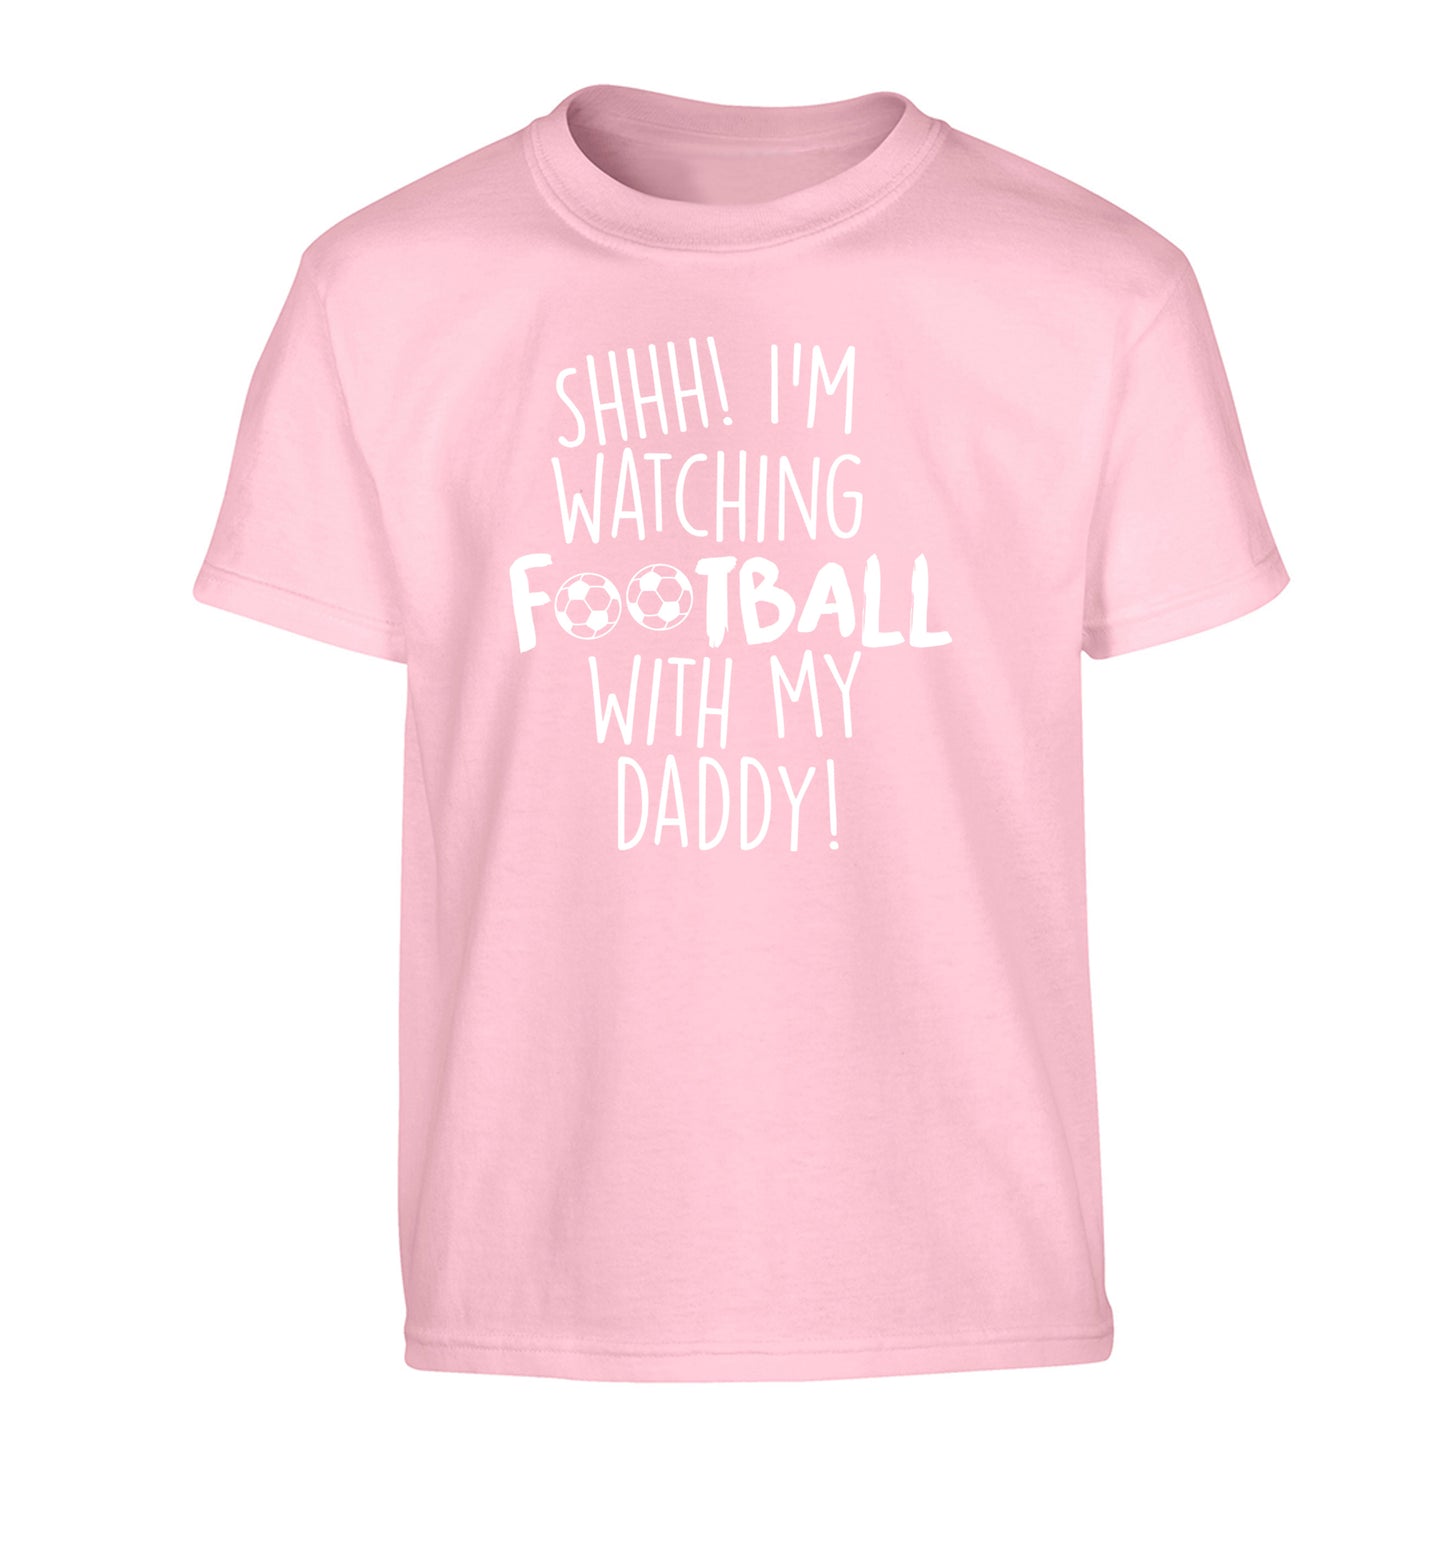 Shhh I'm watching football with my daddy Children's light pink Tshirt 12-14 Years